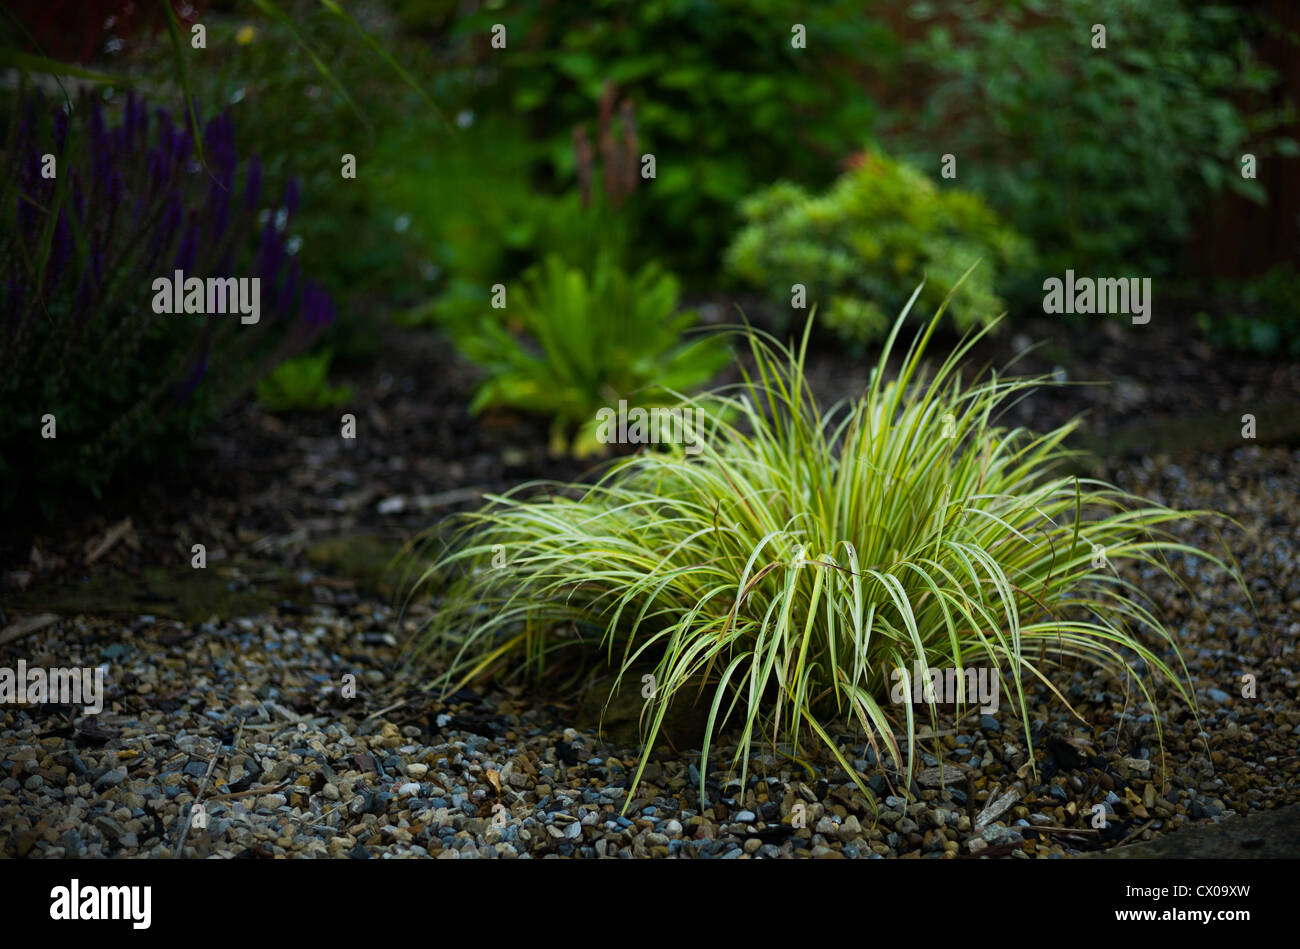 Flora, fauna and plants Stock Photo